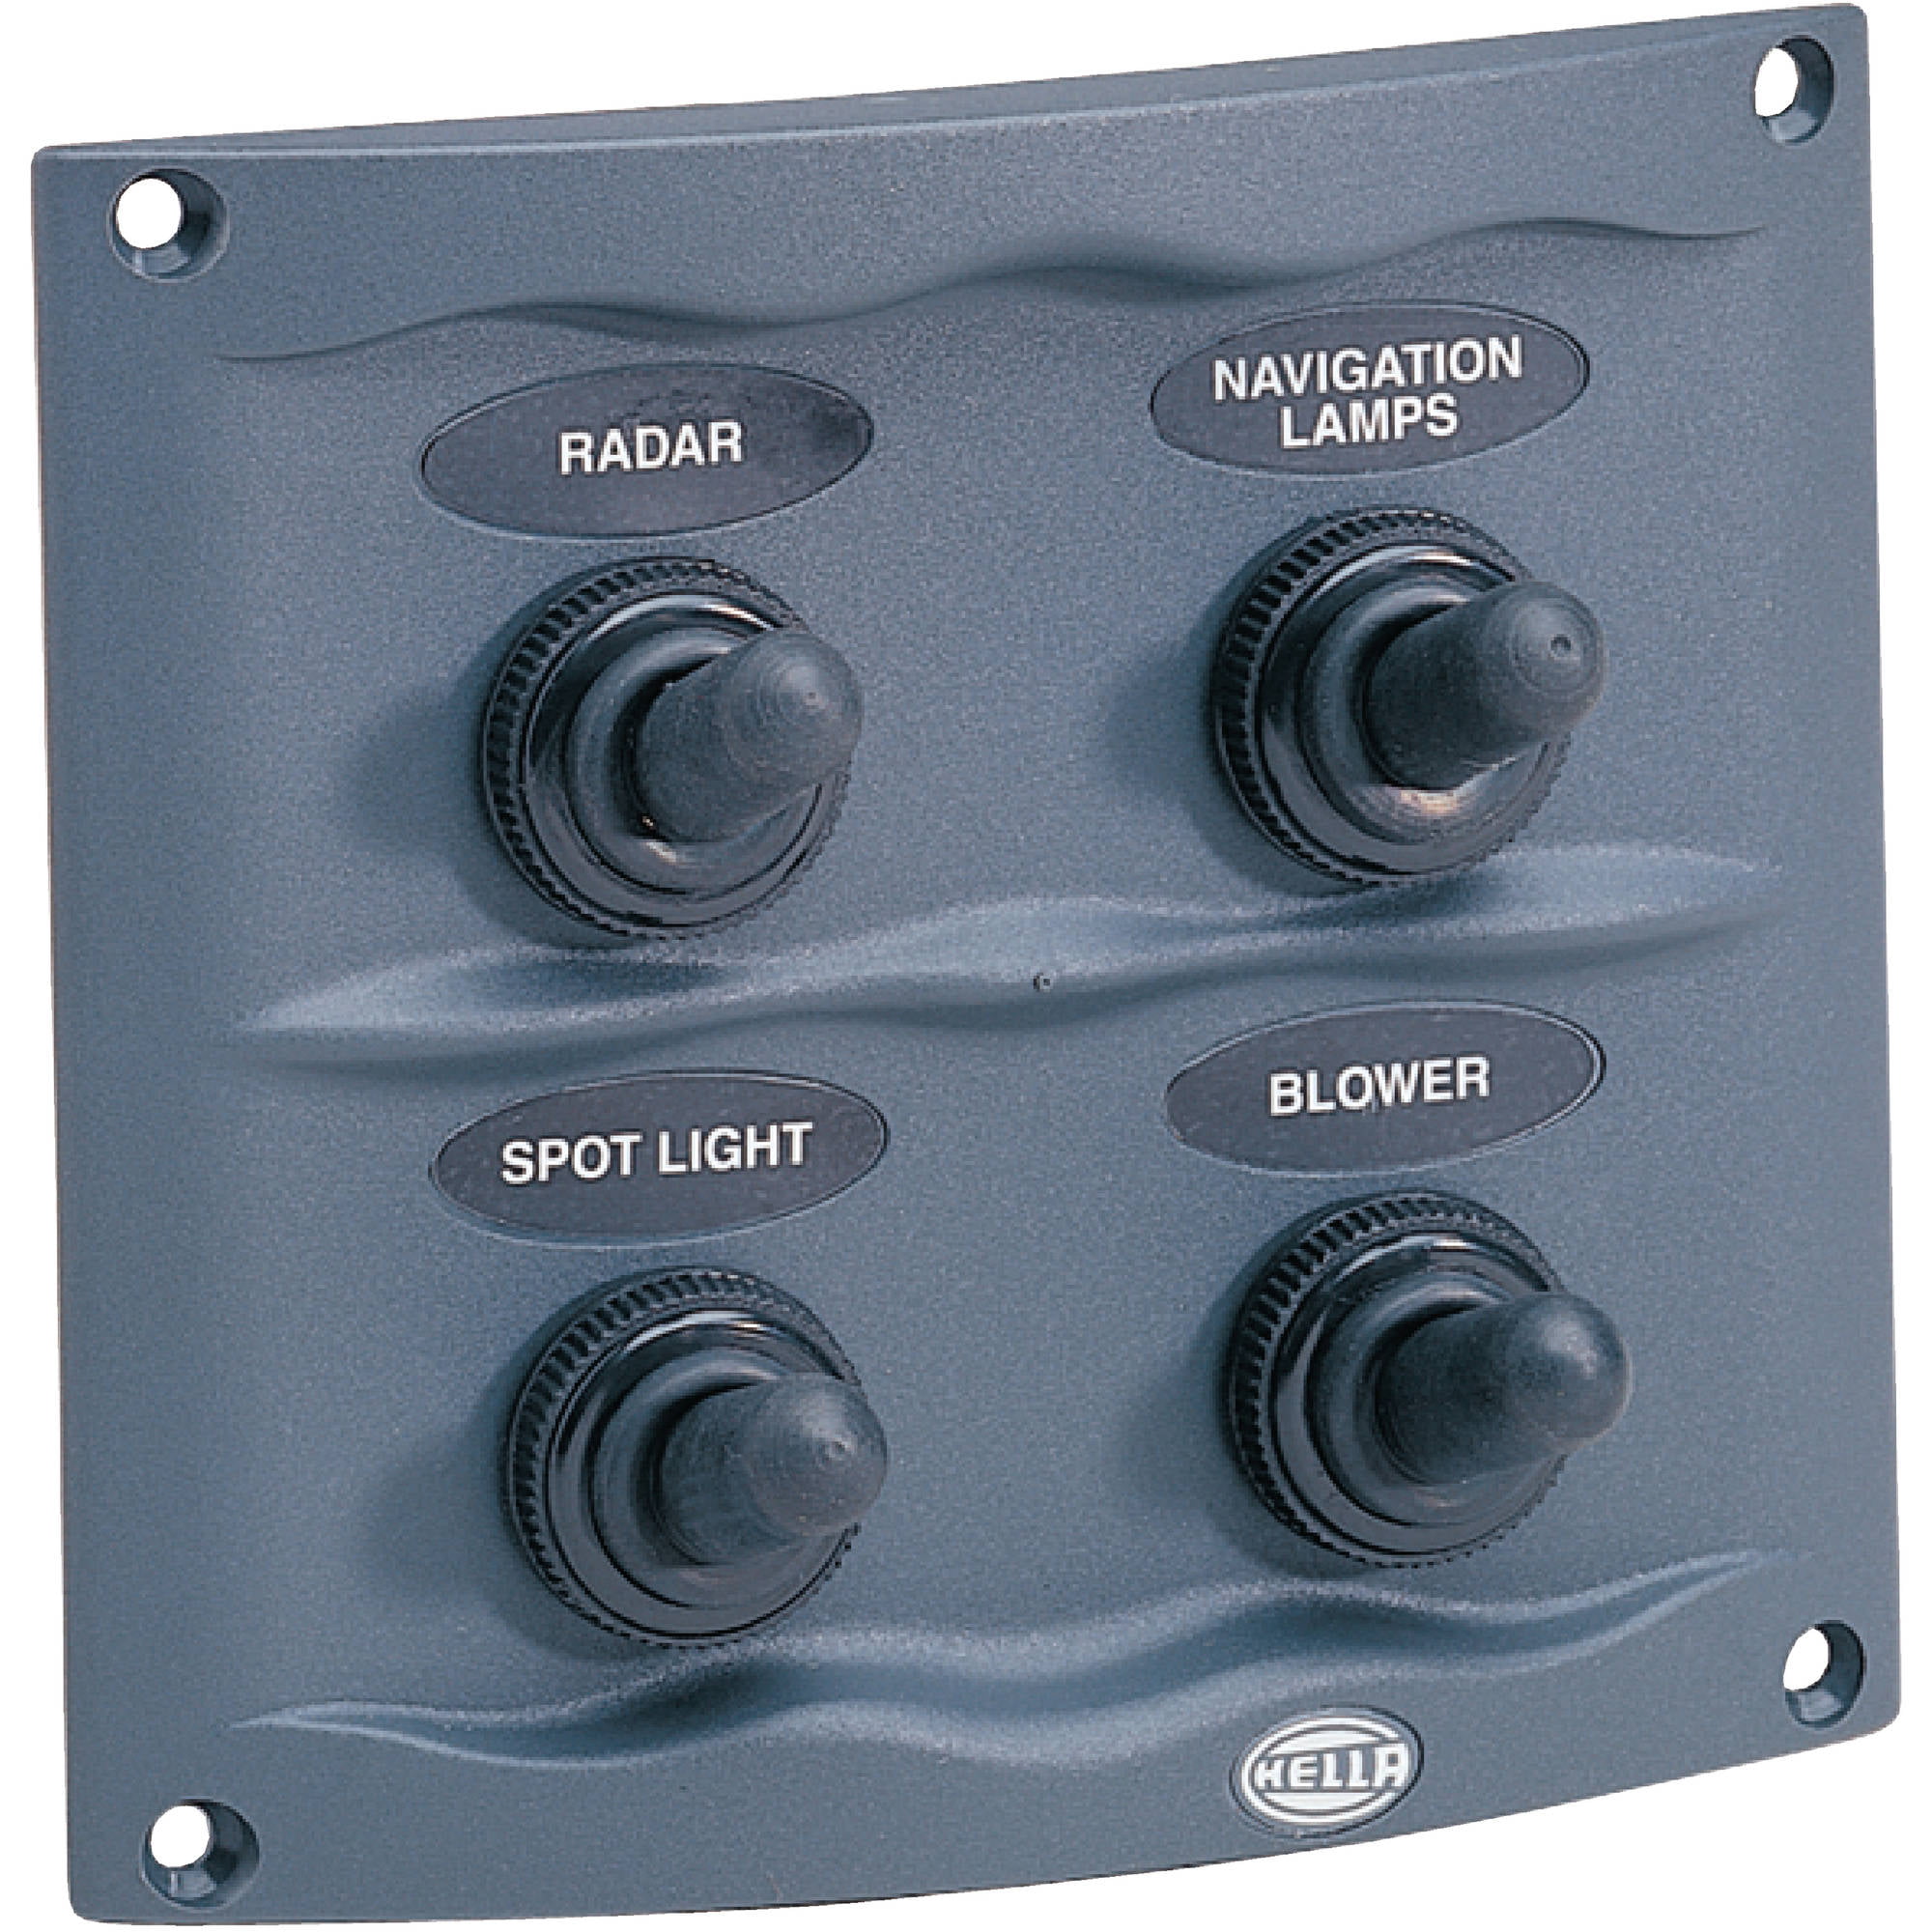 SeaSense 5001560 5 Gang Toggle Switch Panel with 12V Outlet